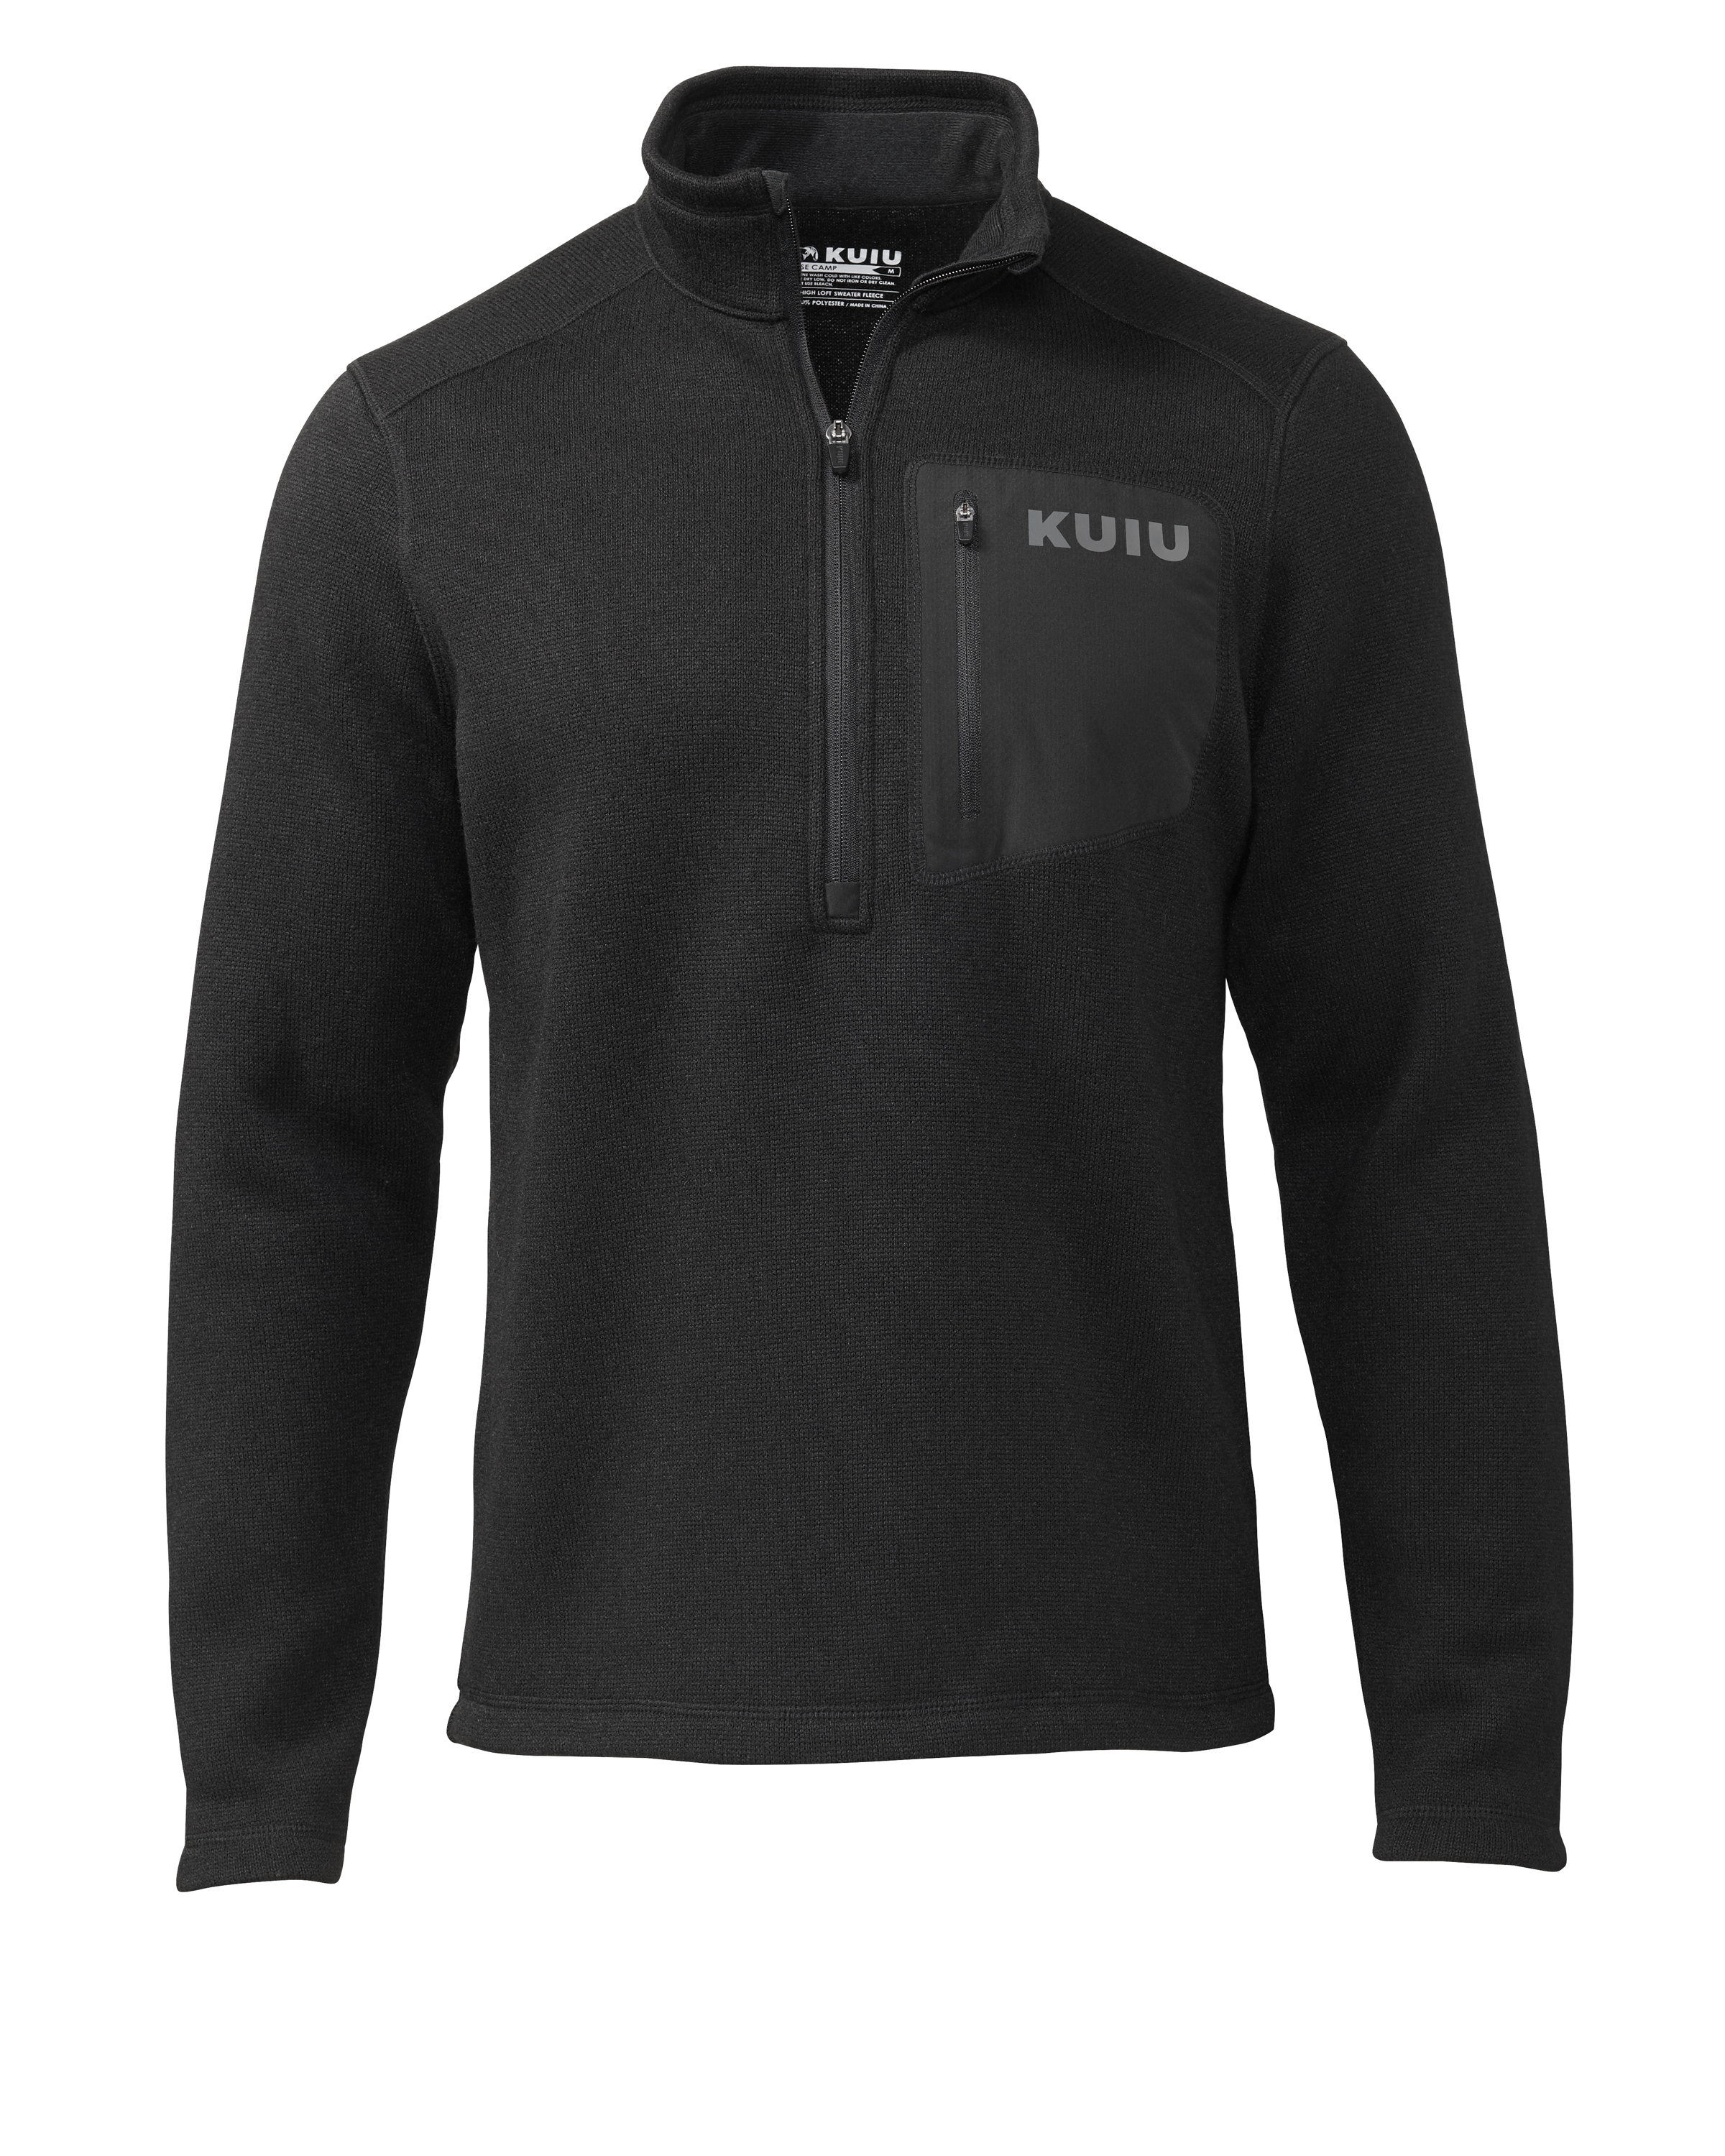 KUIU Base Camp Pullover Sweater in Black | Large